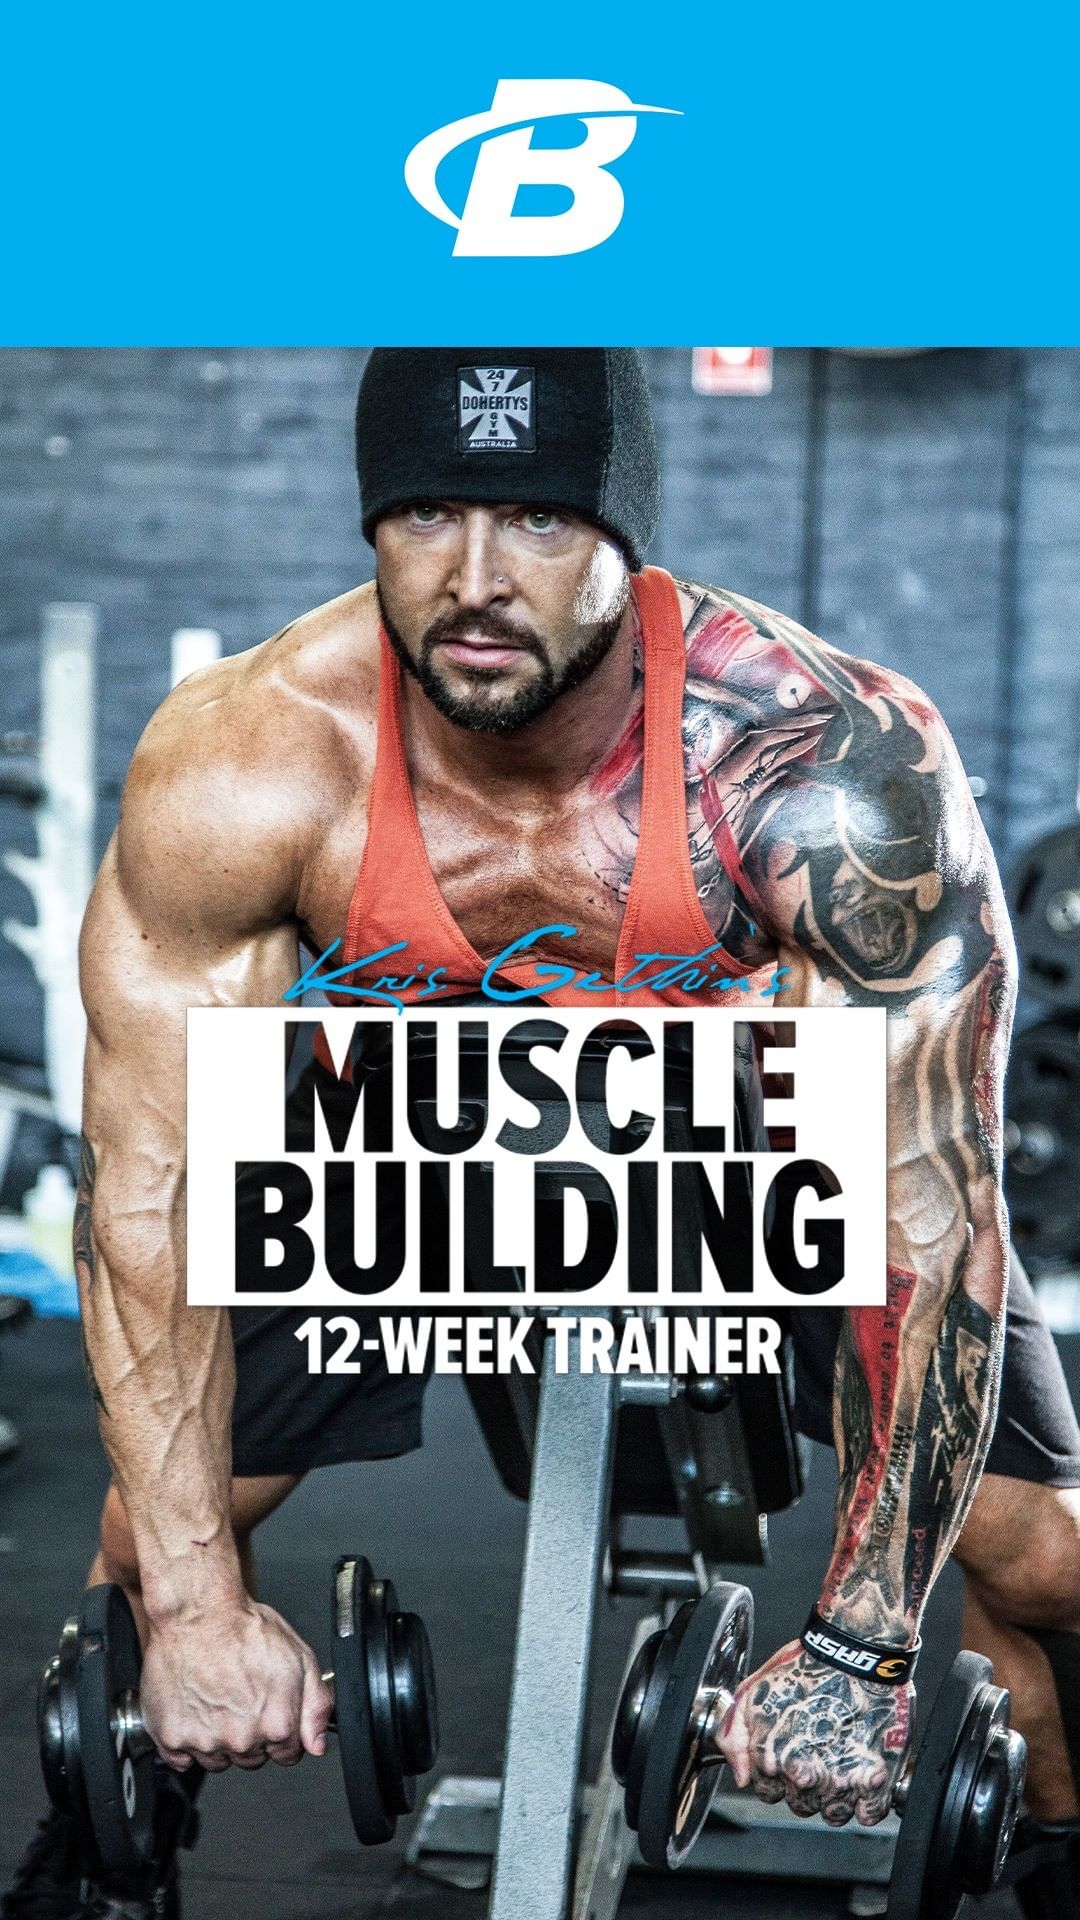 Bodybuilding.com - ► Try Kris Gethin's 12-Week Muscle-Building Program (LINK IN BIO)

Over the course of 15 years of working with some of the world's best experts, Kris Gethin synthesized their techni...